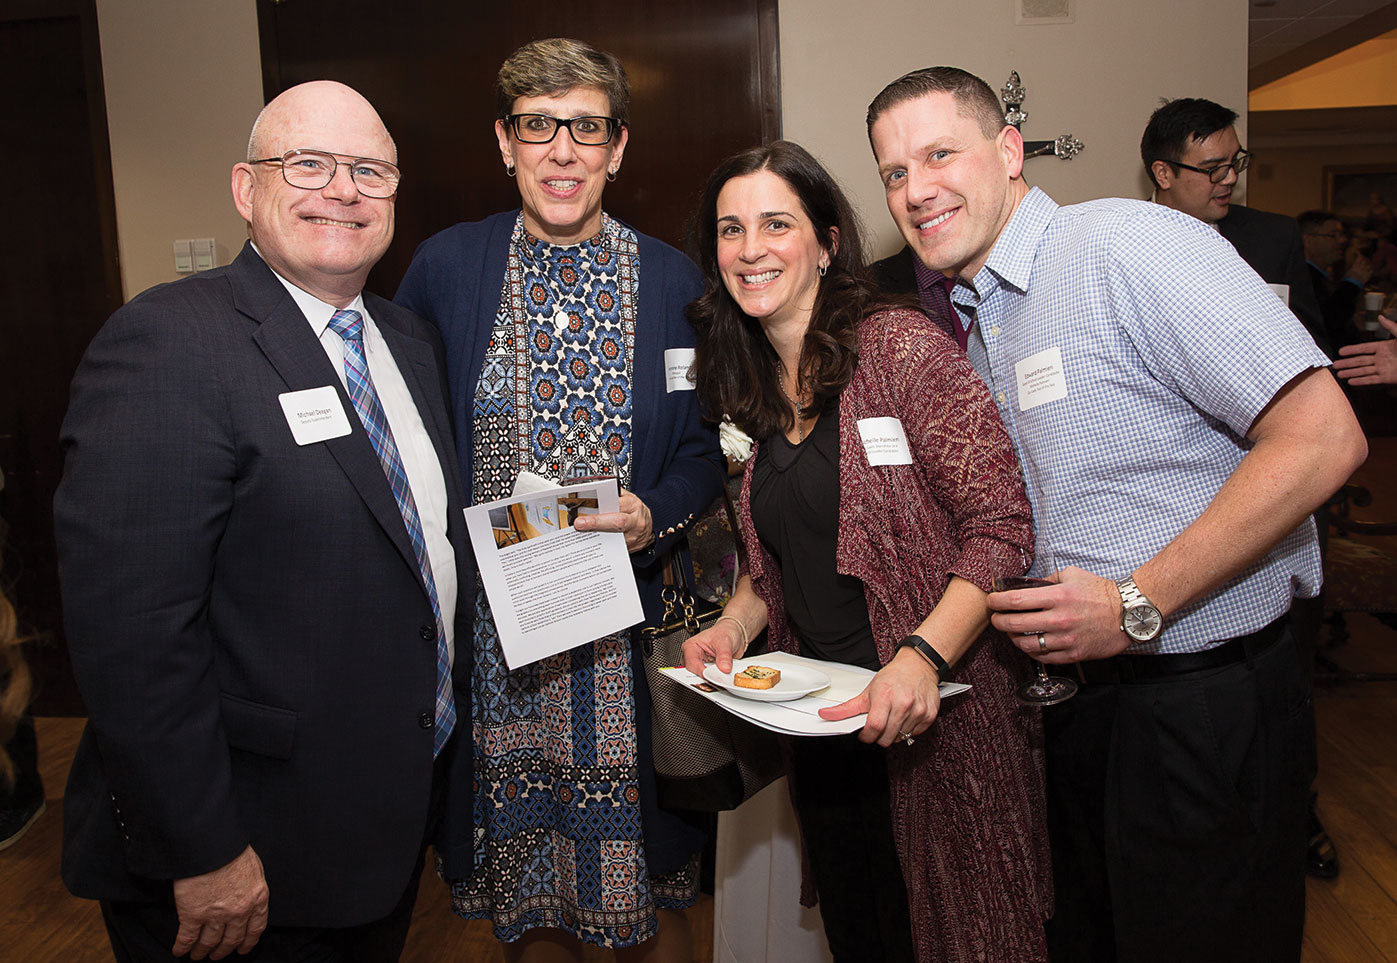 Michael Deegan, far left, deputy superintendent of schools in the archdiocese, joins Jeannine Roland, principal of Our Lady Star of the Sea, Staten Island; Michelle Palmieri, teacher at Our Lady Star of the Sea; and Edward Palmieri, Ms. Palmieri’s husband, at the Evening of Teacher Recognition and Call to Discernment at the New York Catholic Center in Manhattan Jan. 24. Ms. Palmieri was one of more than 40 distinguished teachers in the archdiocese invited to apply for a Curran Fellowship.